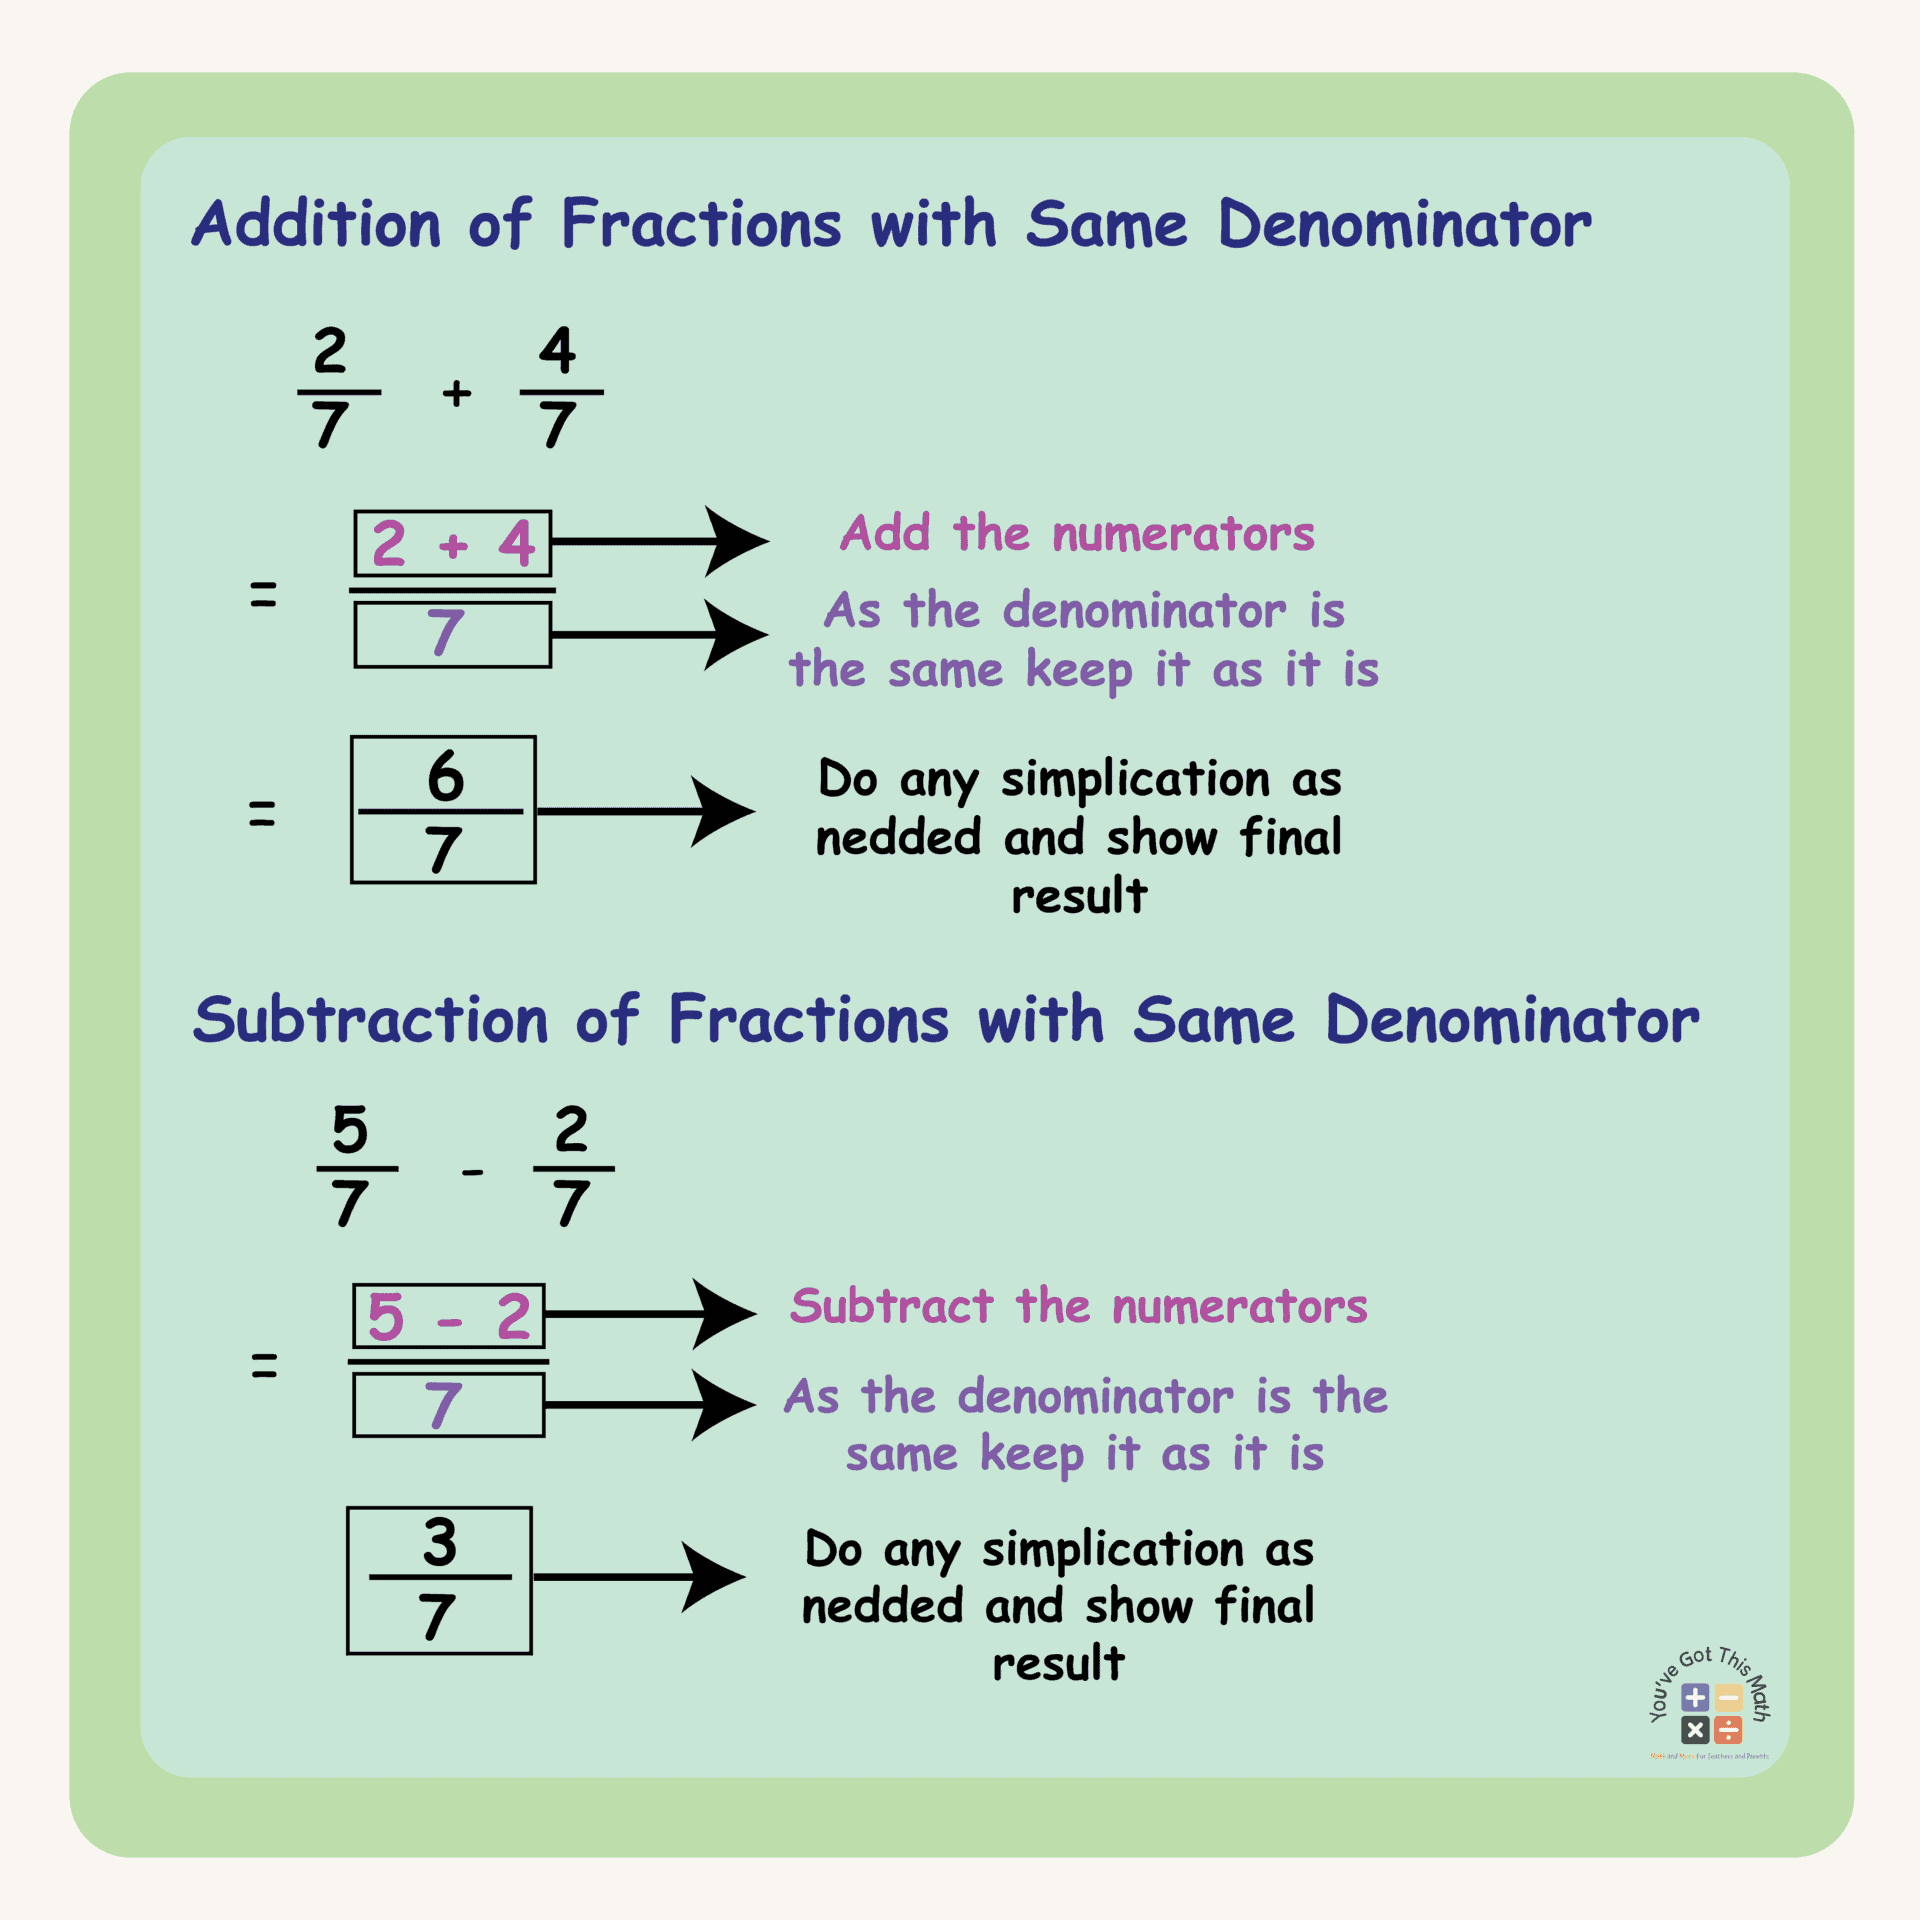 Addition and Subtraction of Fraction with Same Denominator